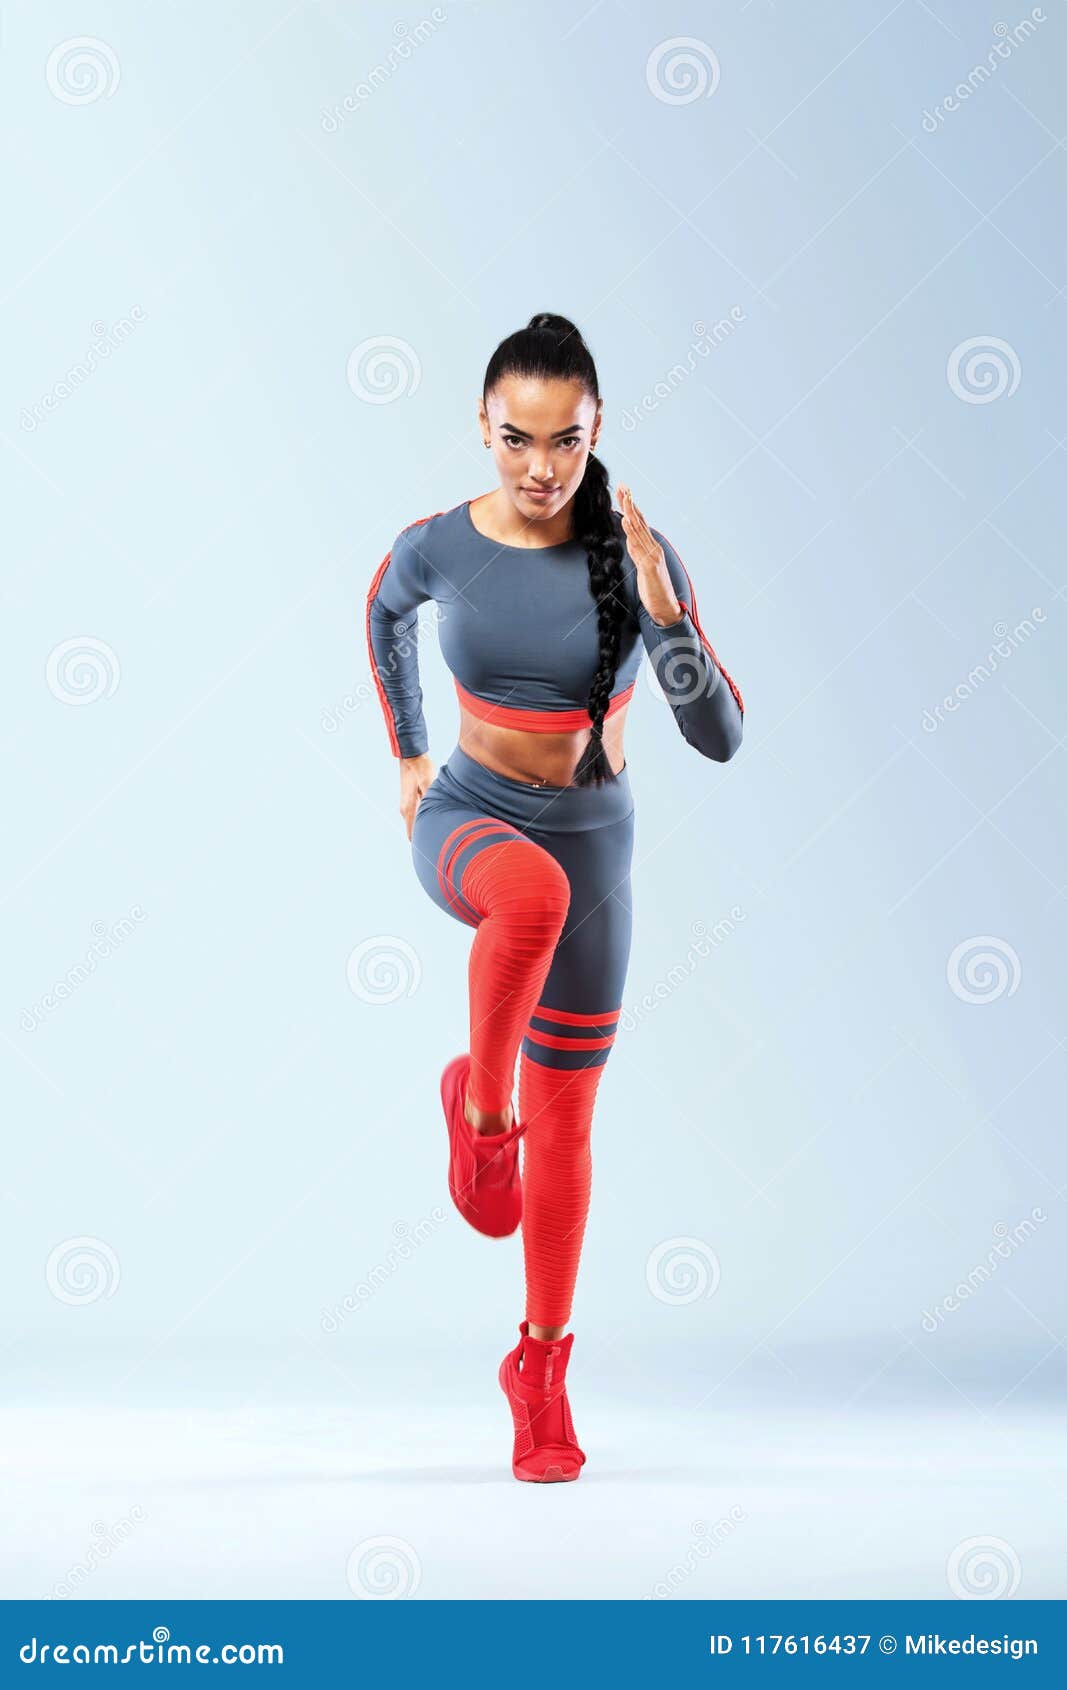 A Strong Athletic, Women Sprinter, Running Wearing in the